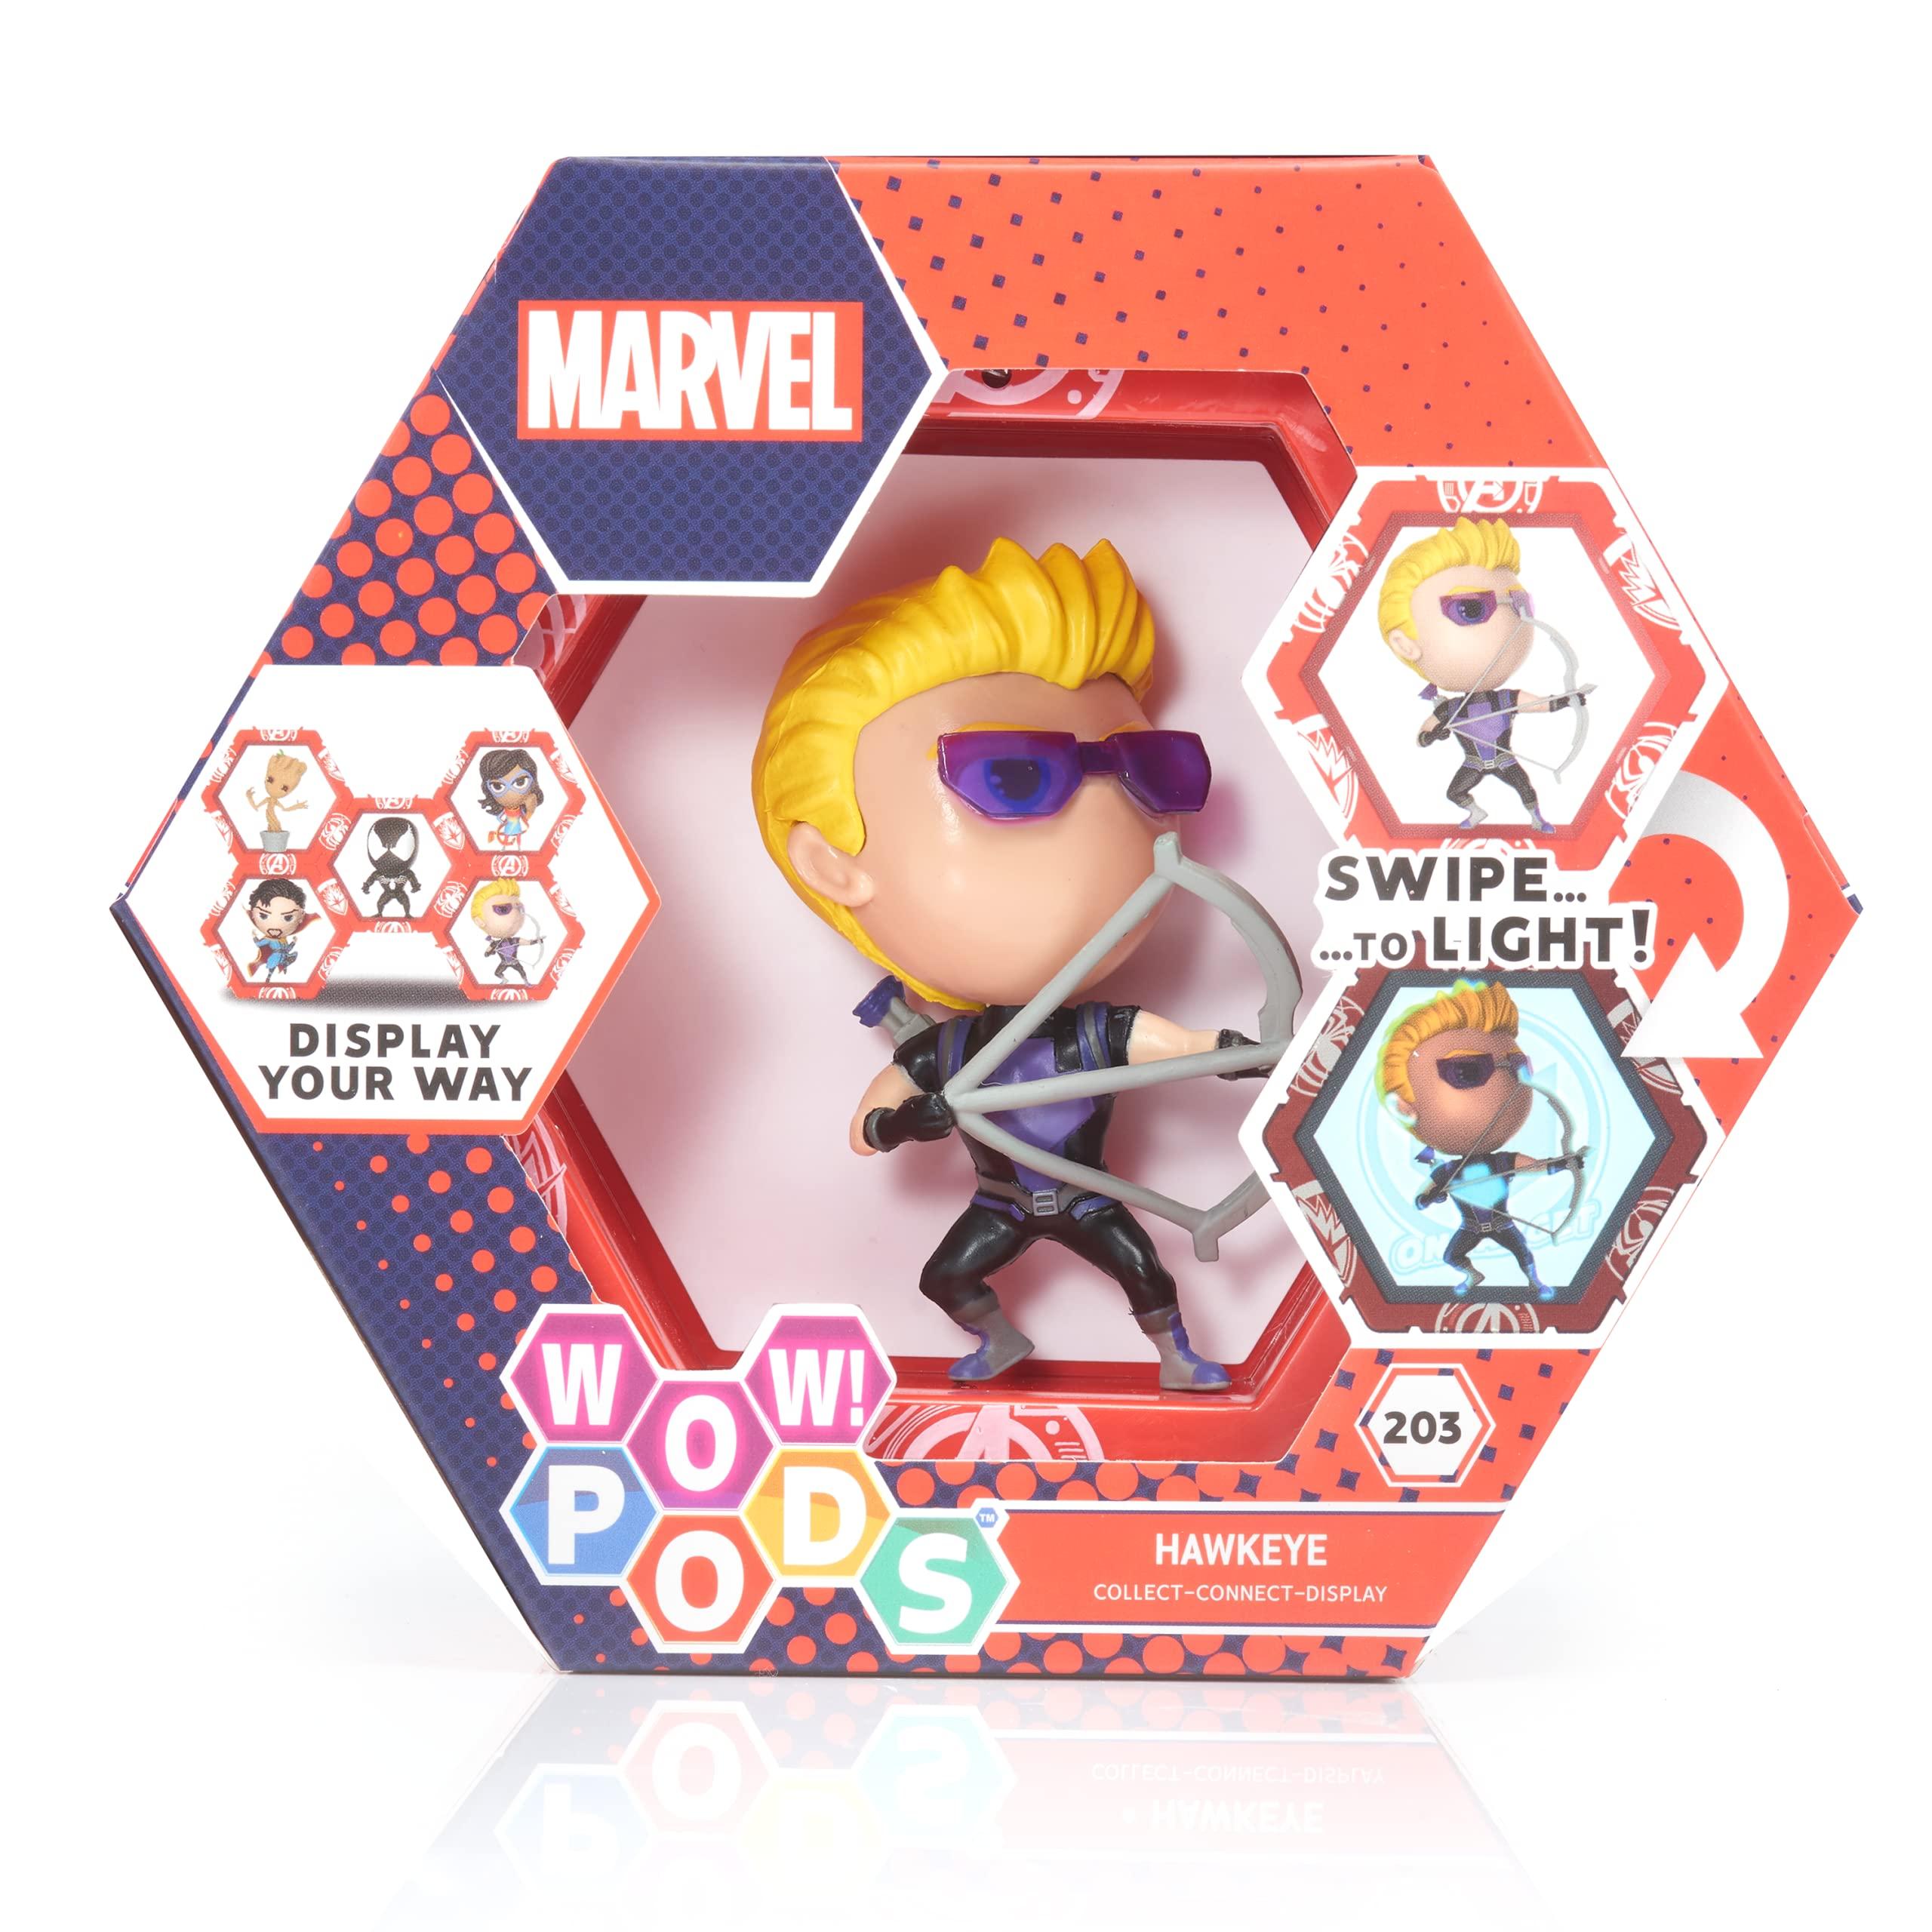 - Hawkeye | Superhero Light-Up Bobble-Head Figure | Official Marvel Collectable Toys & Gifts | Number 203 in Series